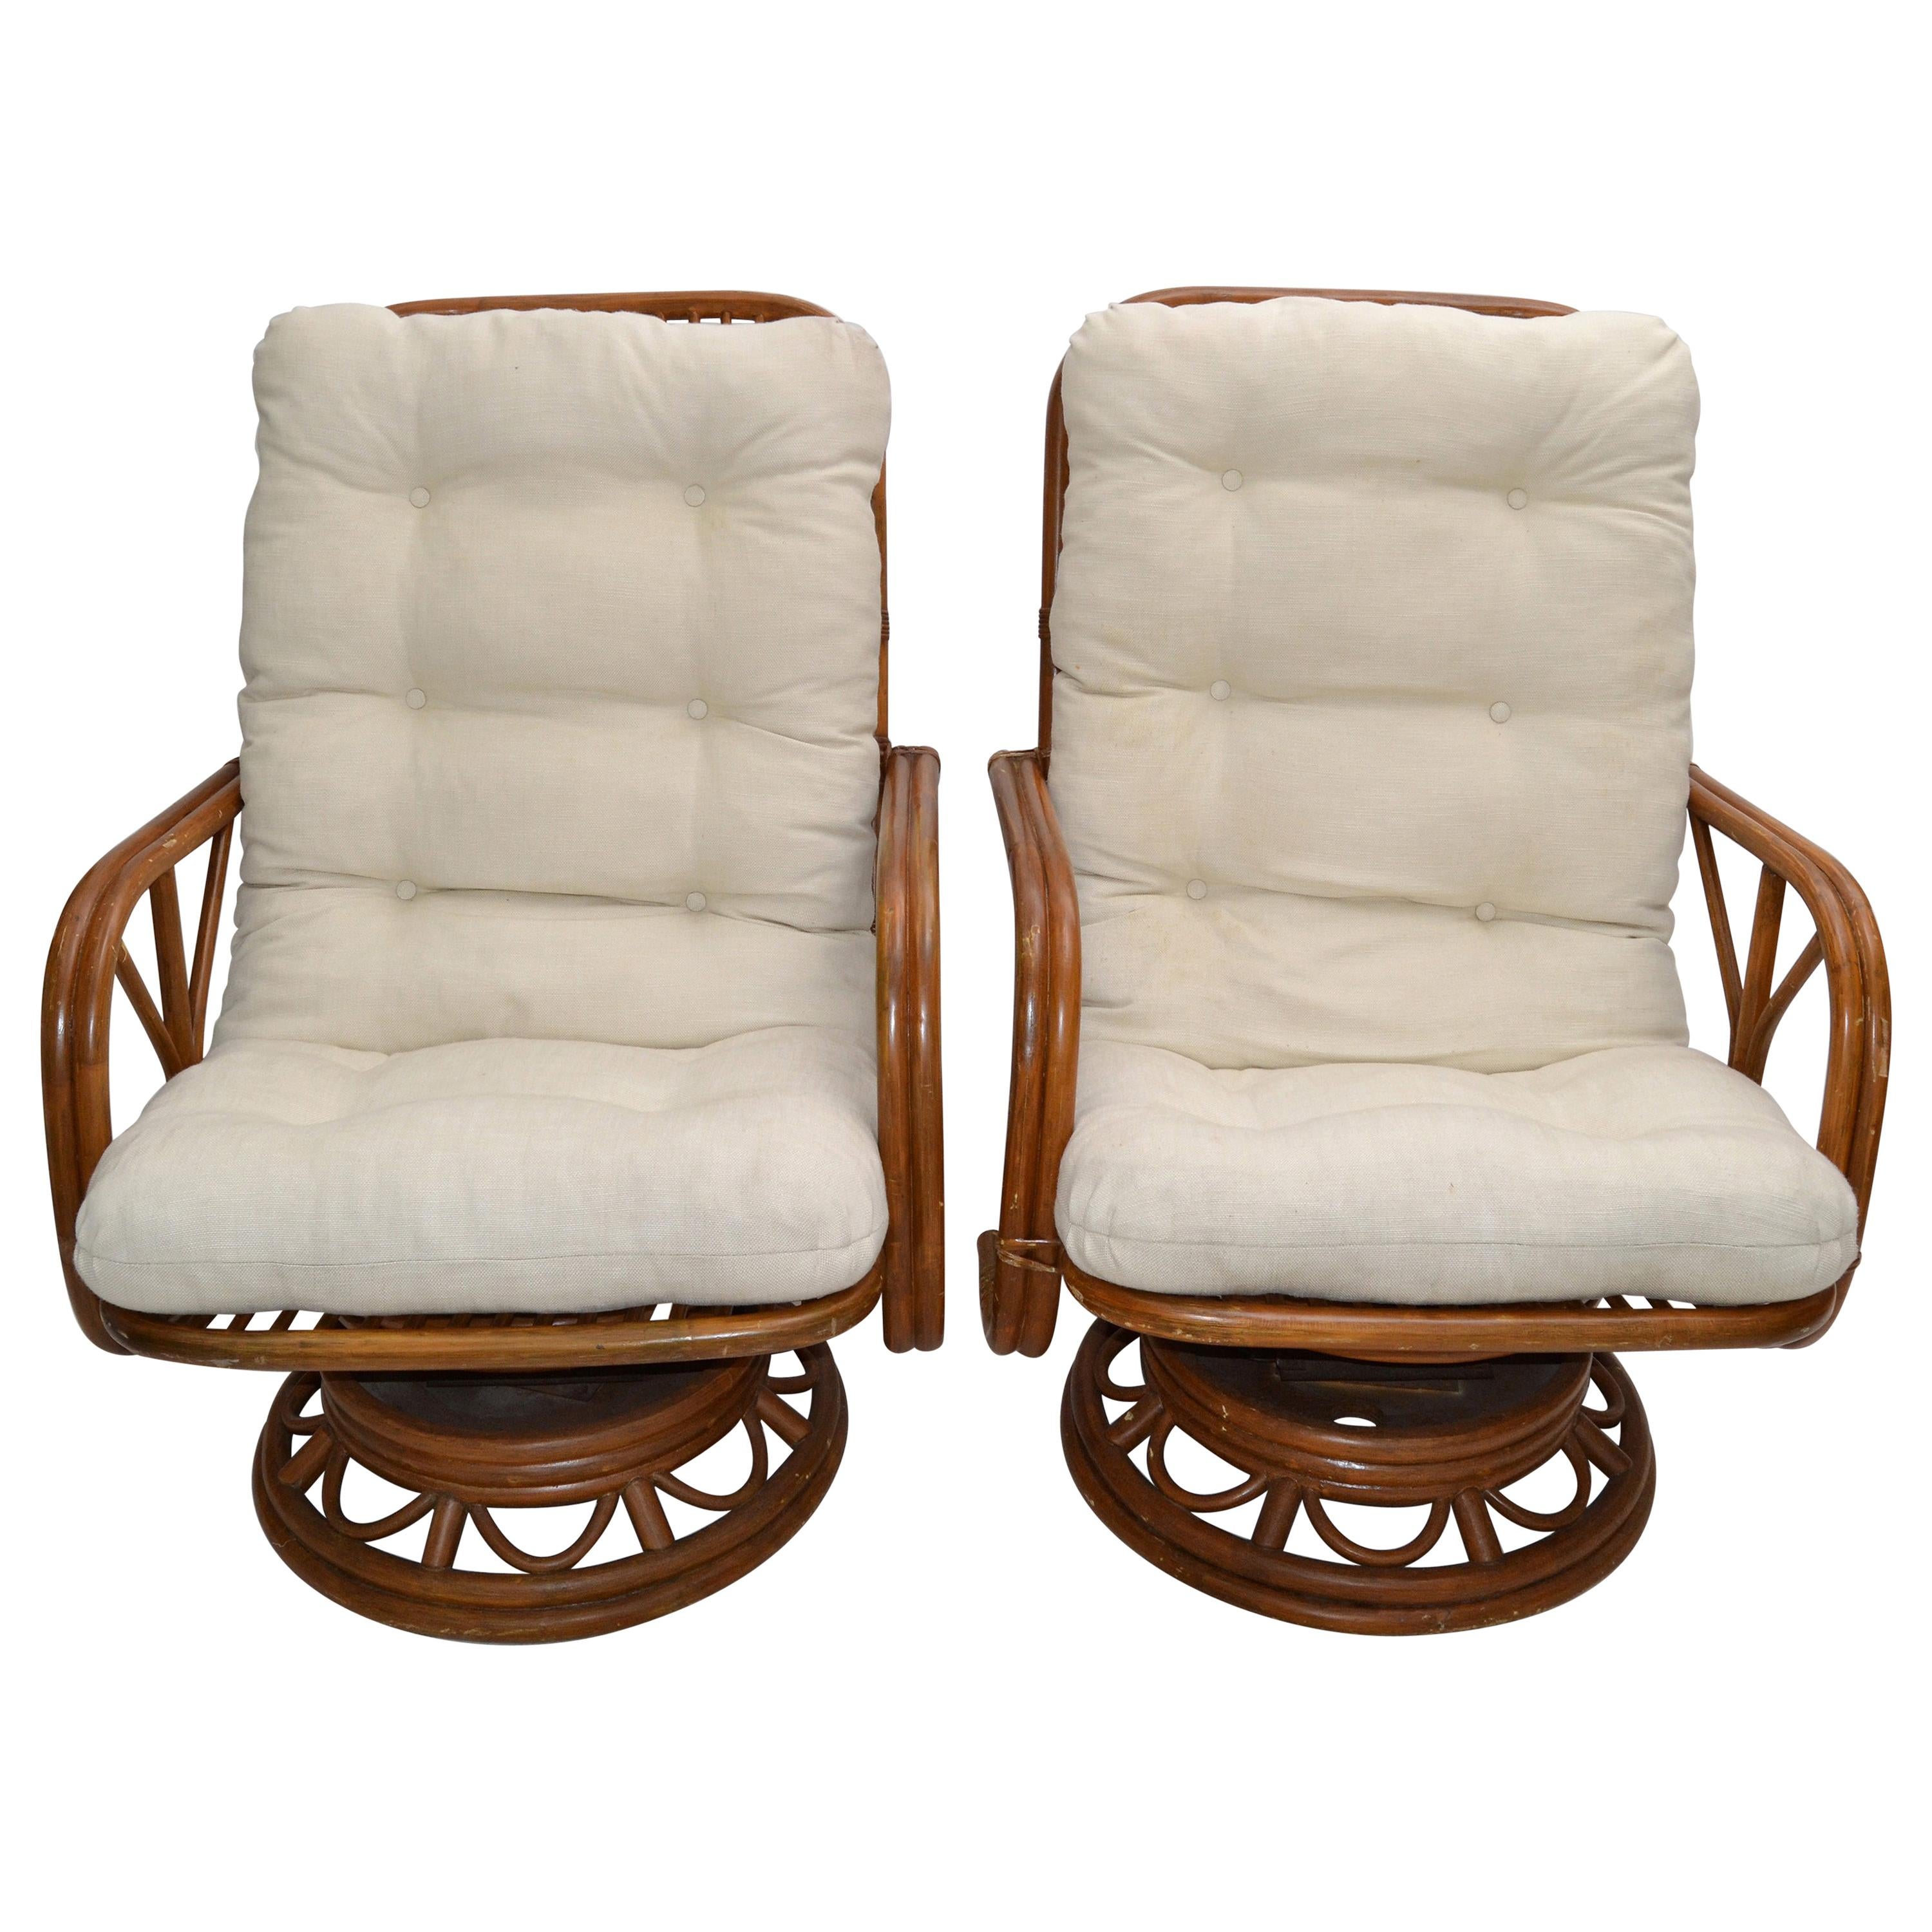 Vintage Bamboo & Wicker High Back Lounge Chair Beige Linen Upholstery, Pair For Sale